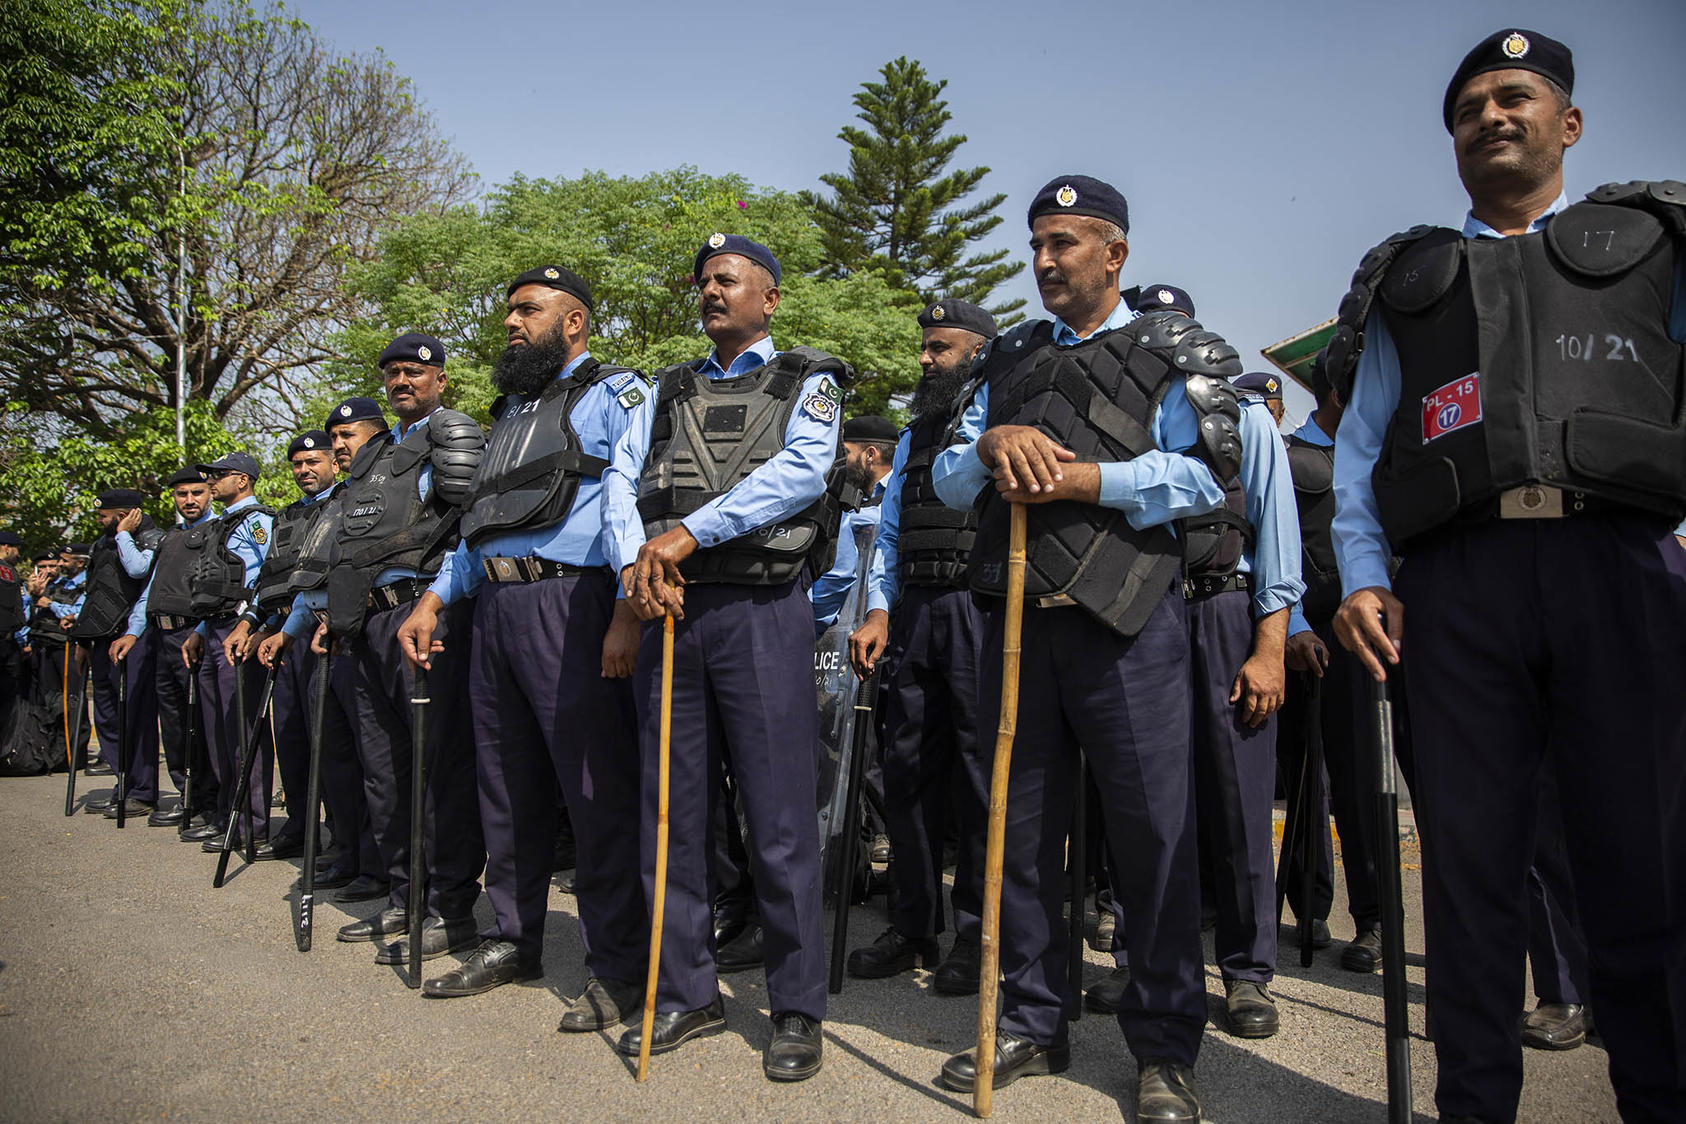 Security forces outside Parliament in Islamabad, Pakistan ahead of a no-confidence vote against Prime Minister Imran Khan, on Saturday, April 9, 2022. (Saiyna Bashir/The New York Times)